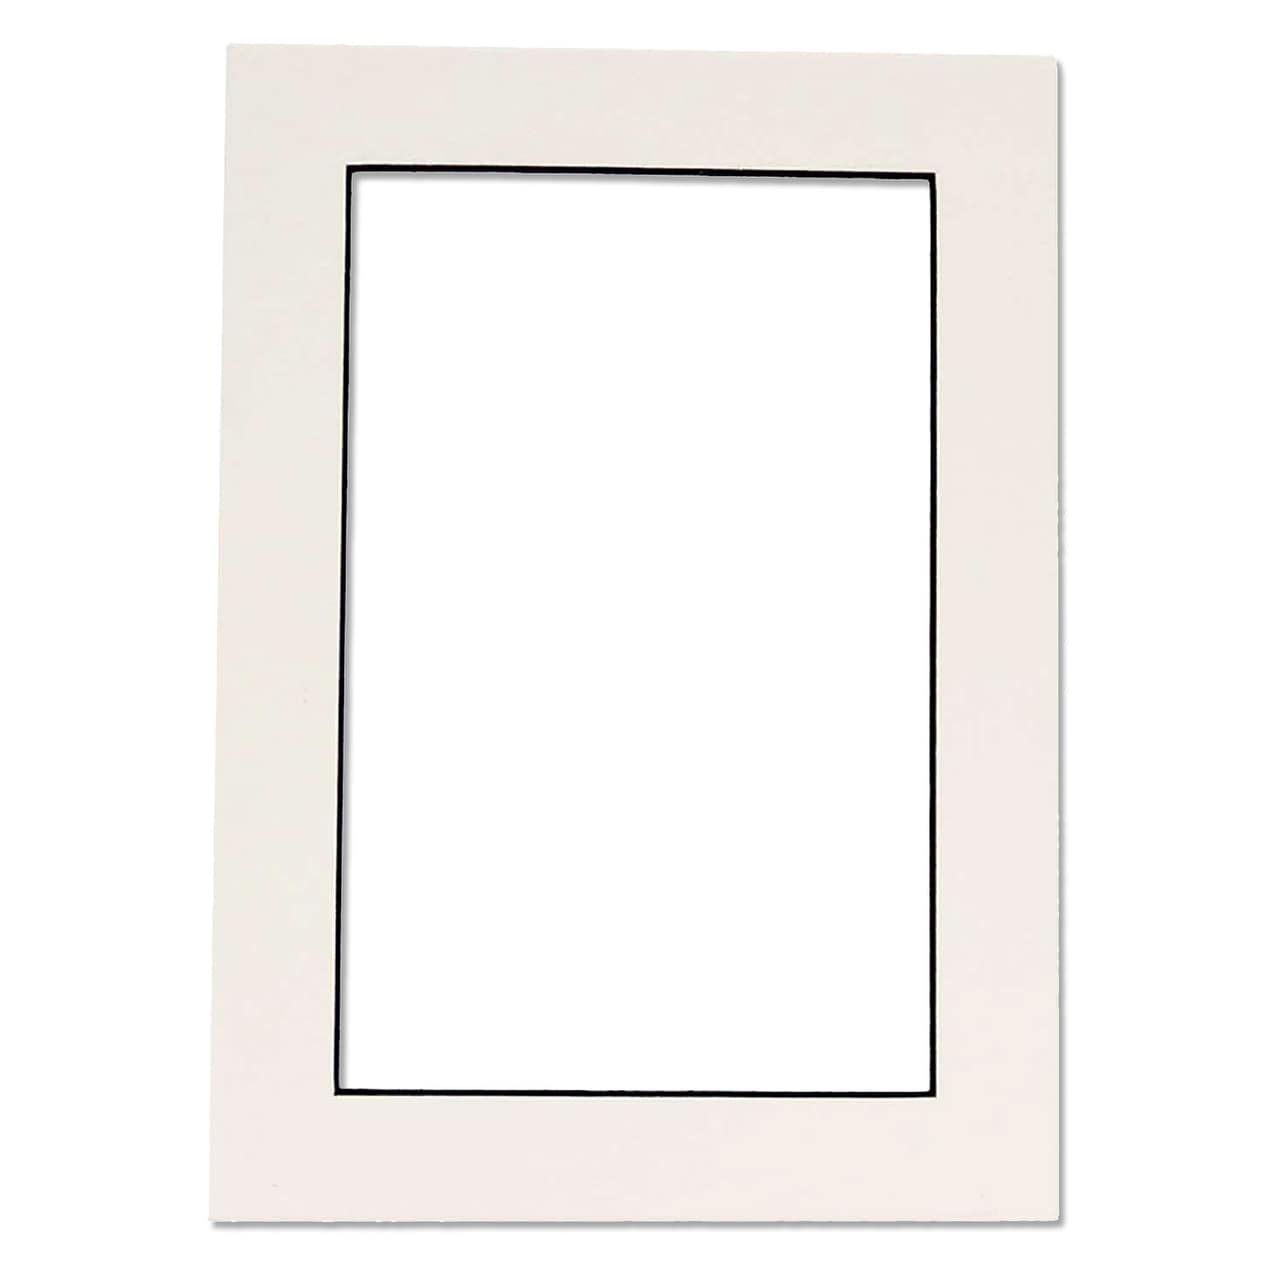 11x14 Mat for 8x10 Photo - Precut White on Black Double Mat Picture  Matboard for Frames Measuring 11 x 14 Inches - Bevel Cut Matte to Display  Art